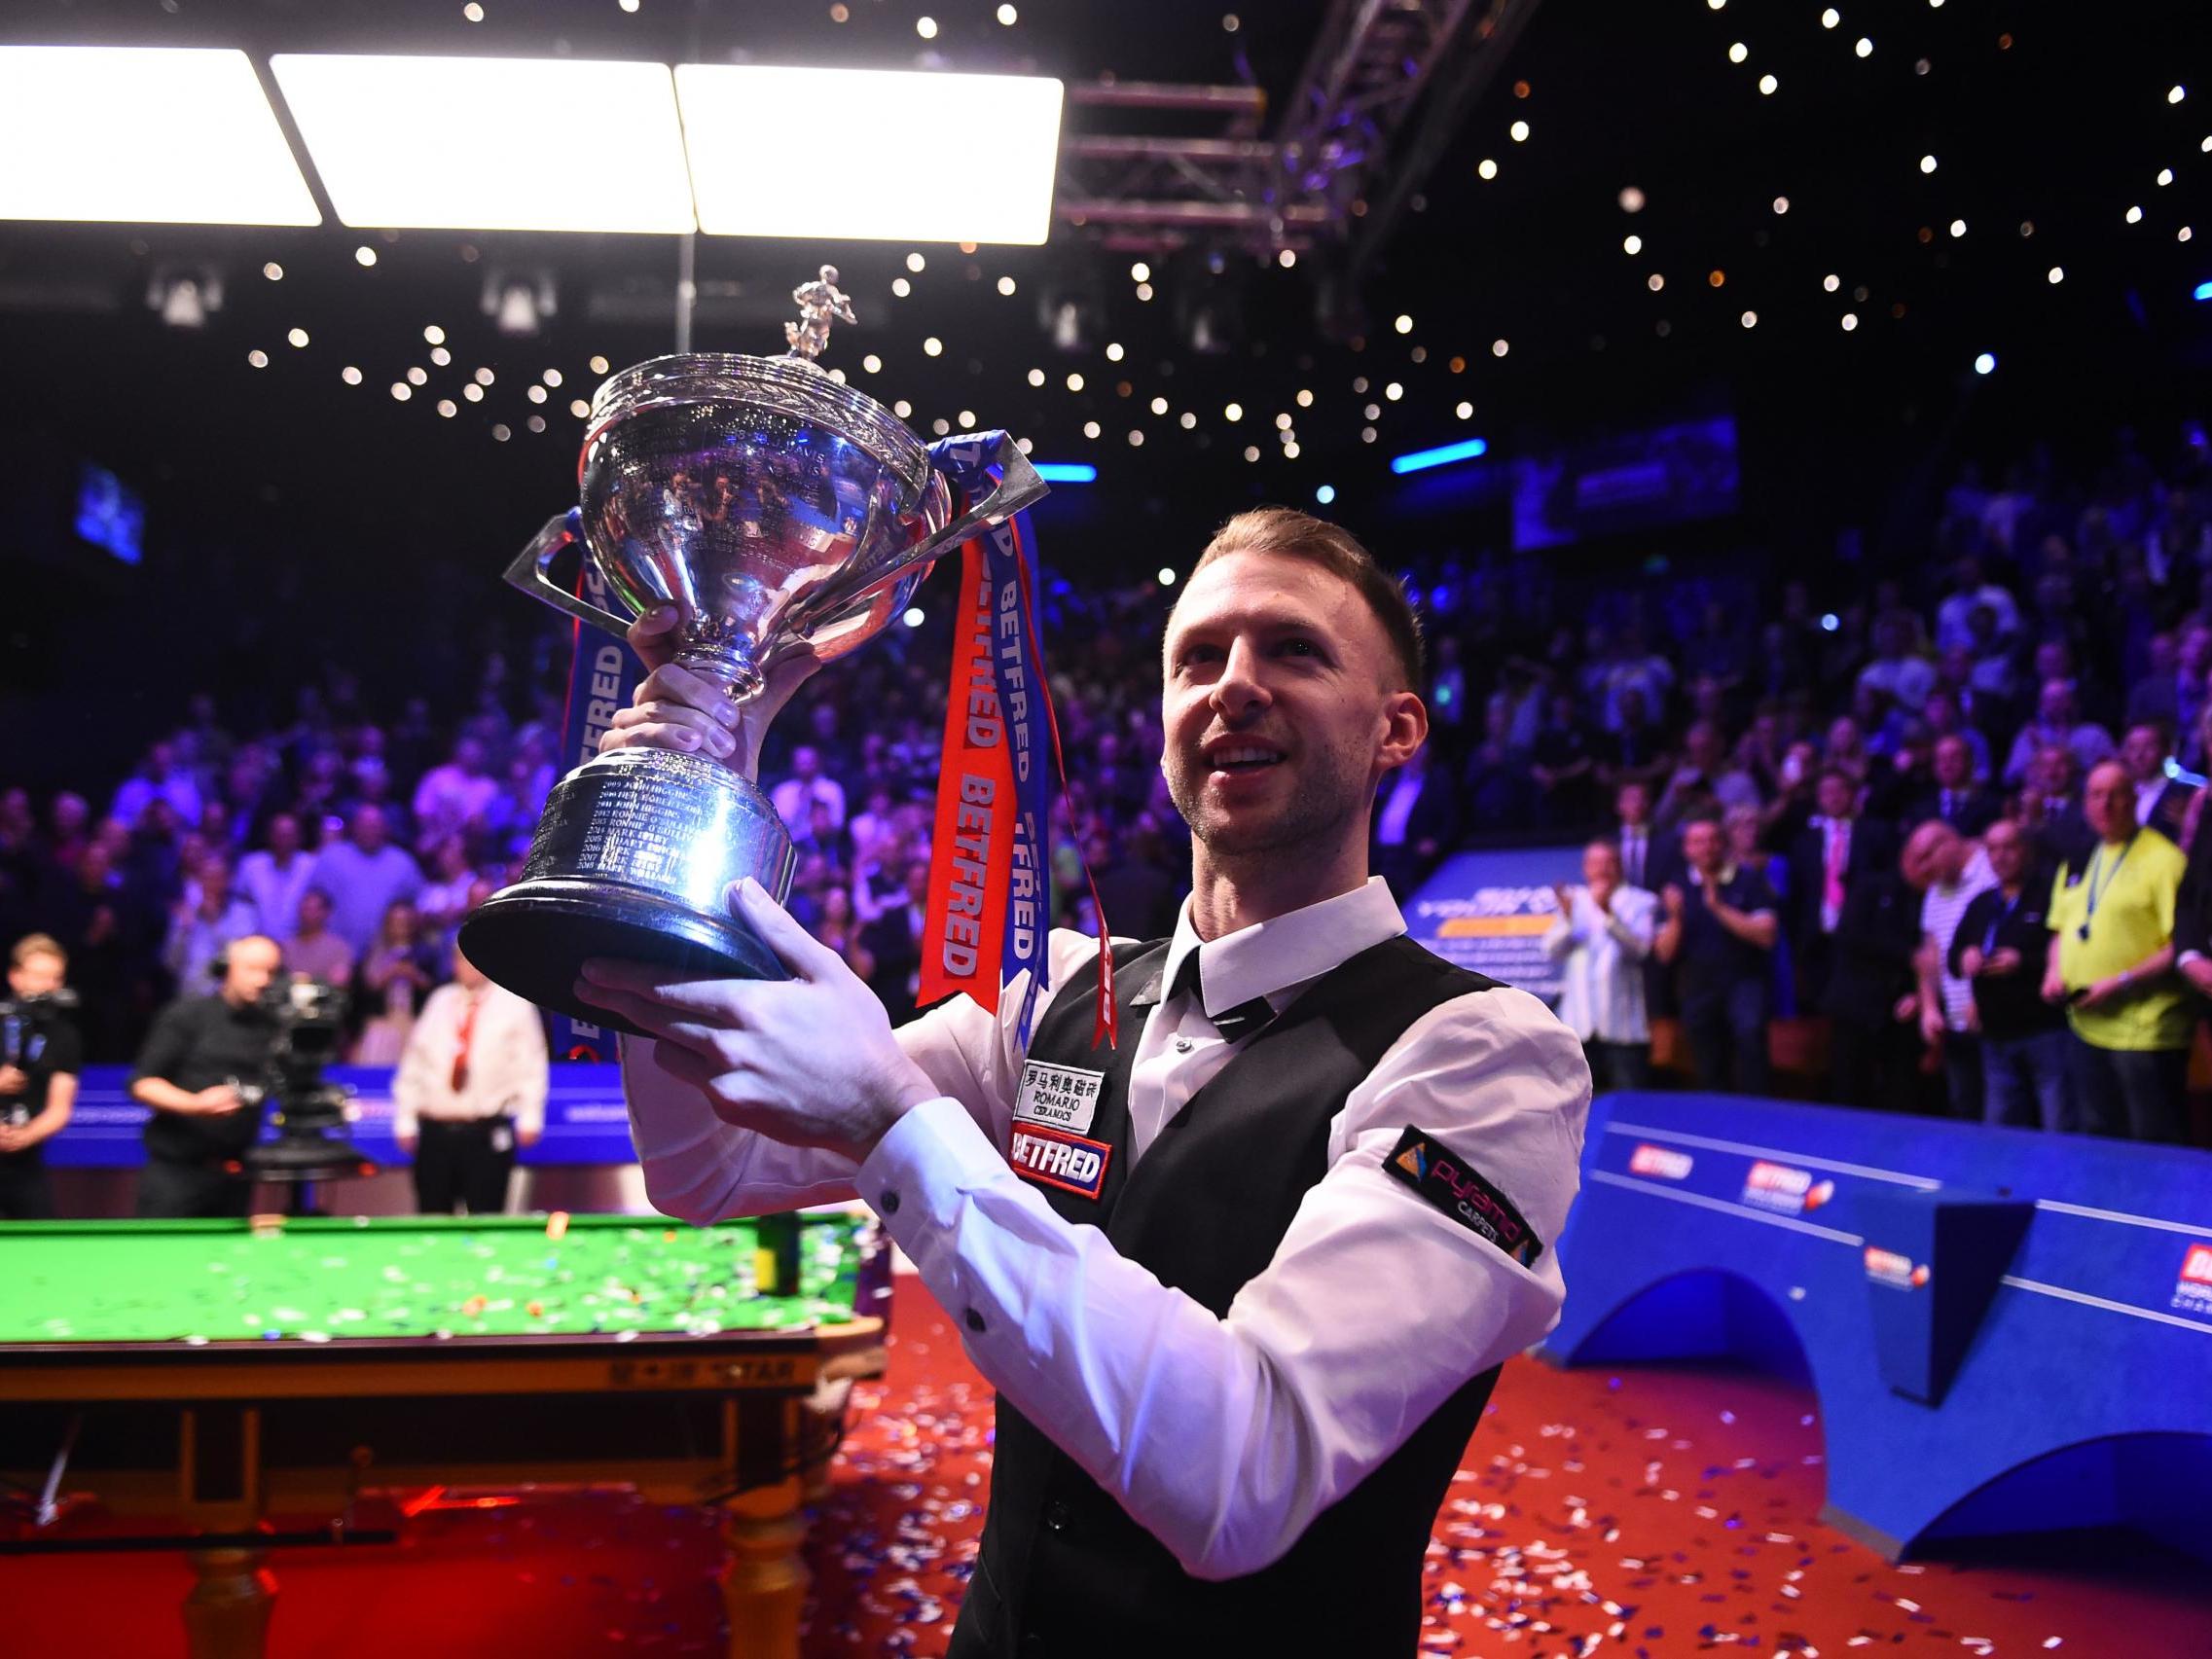 World Snooker Championship 2019 final result Judd Trump finishes off John Higgins in style to clinch first title The Independent The Independent